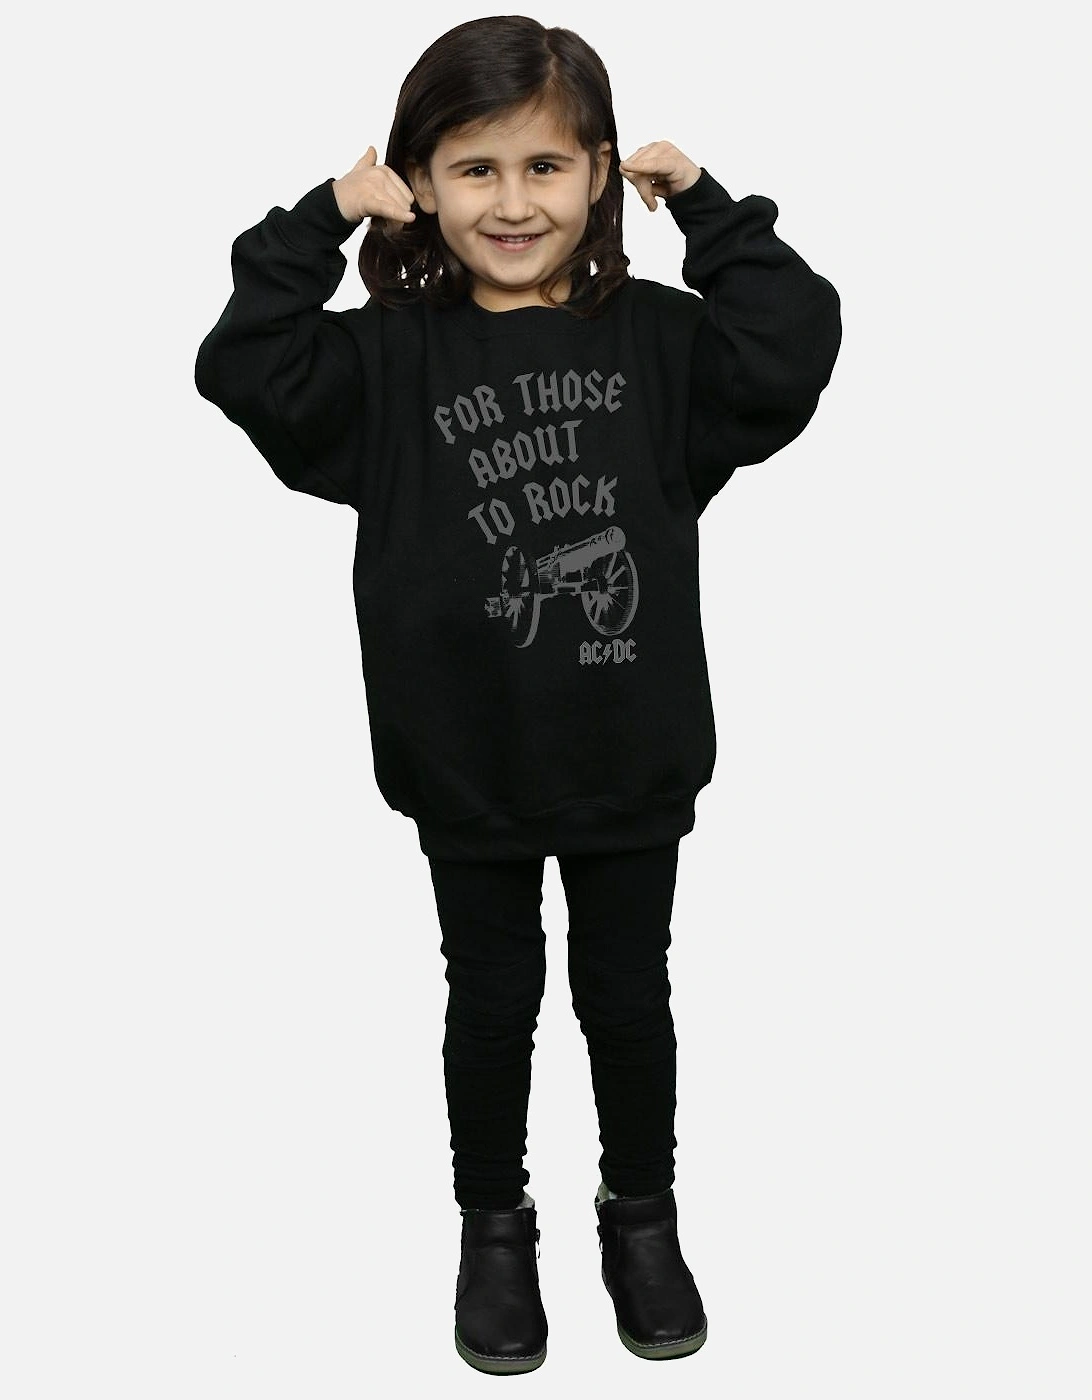 Girls For Those About To Rock Cannon Sweatshirt